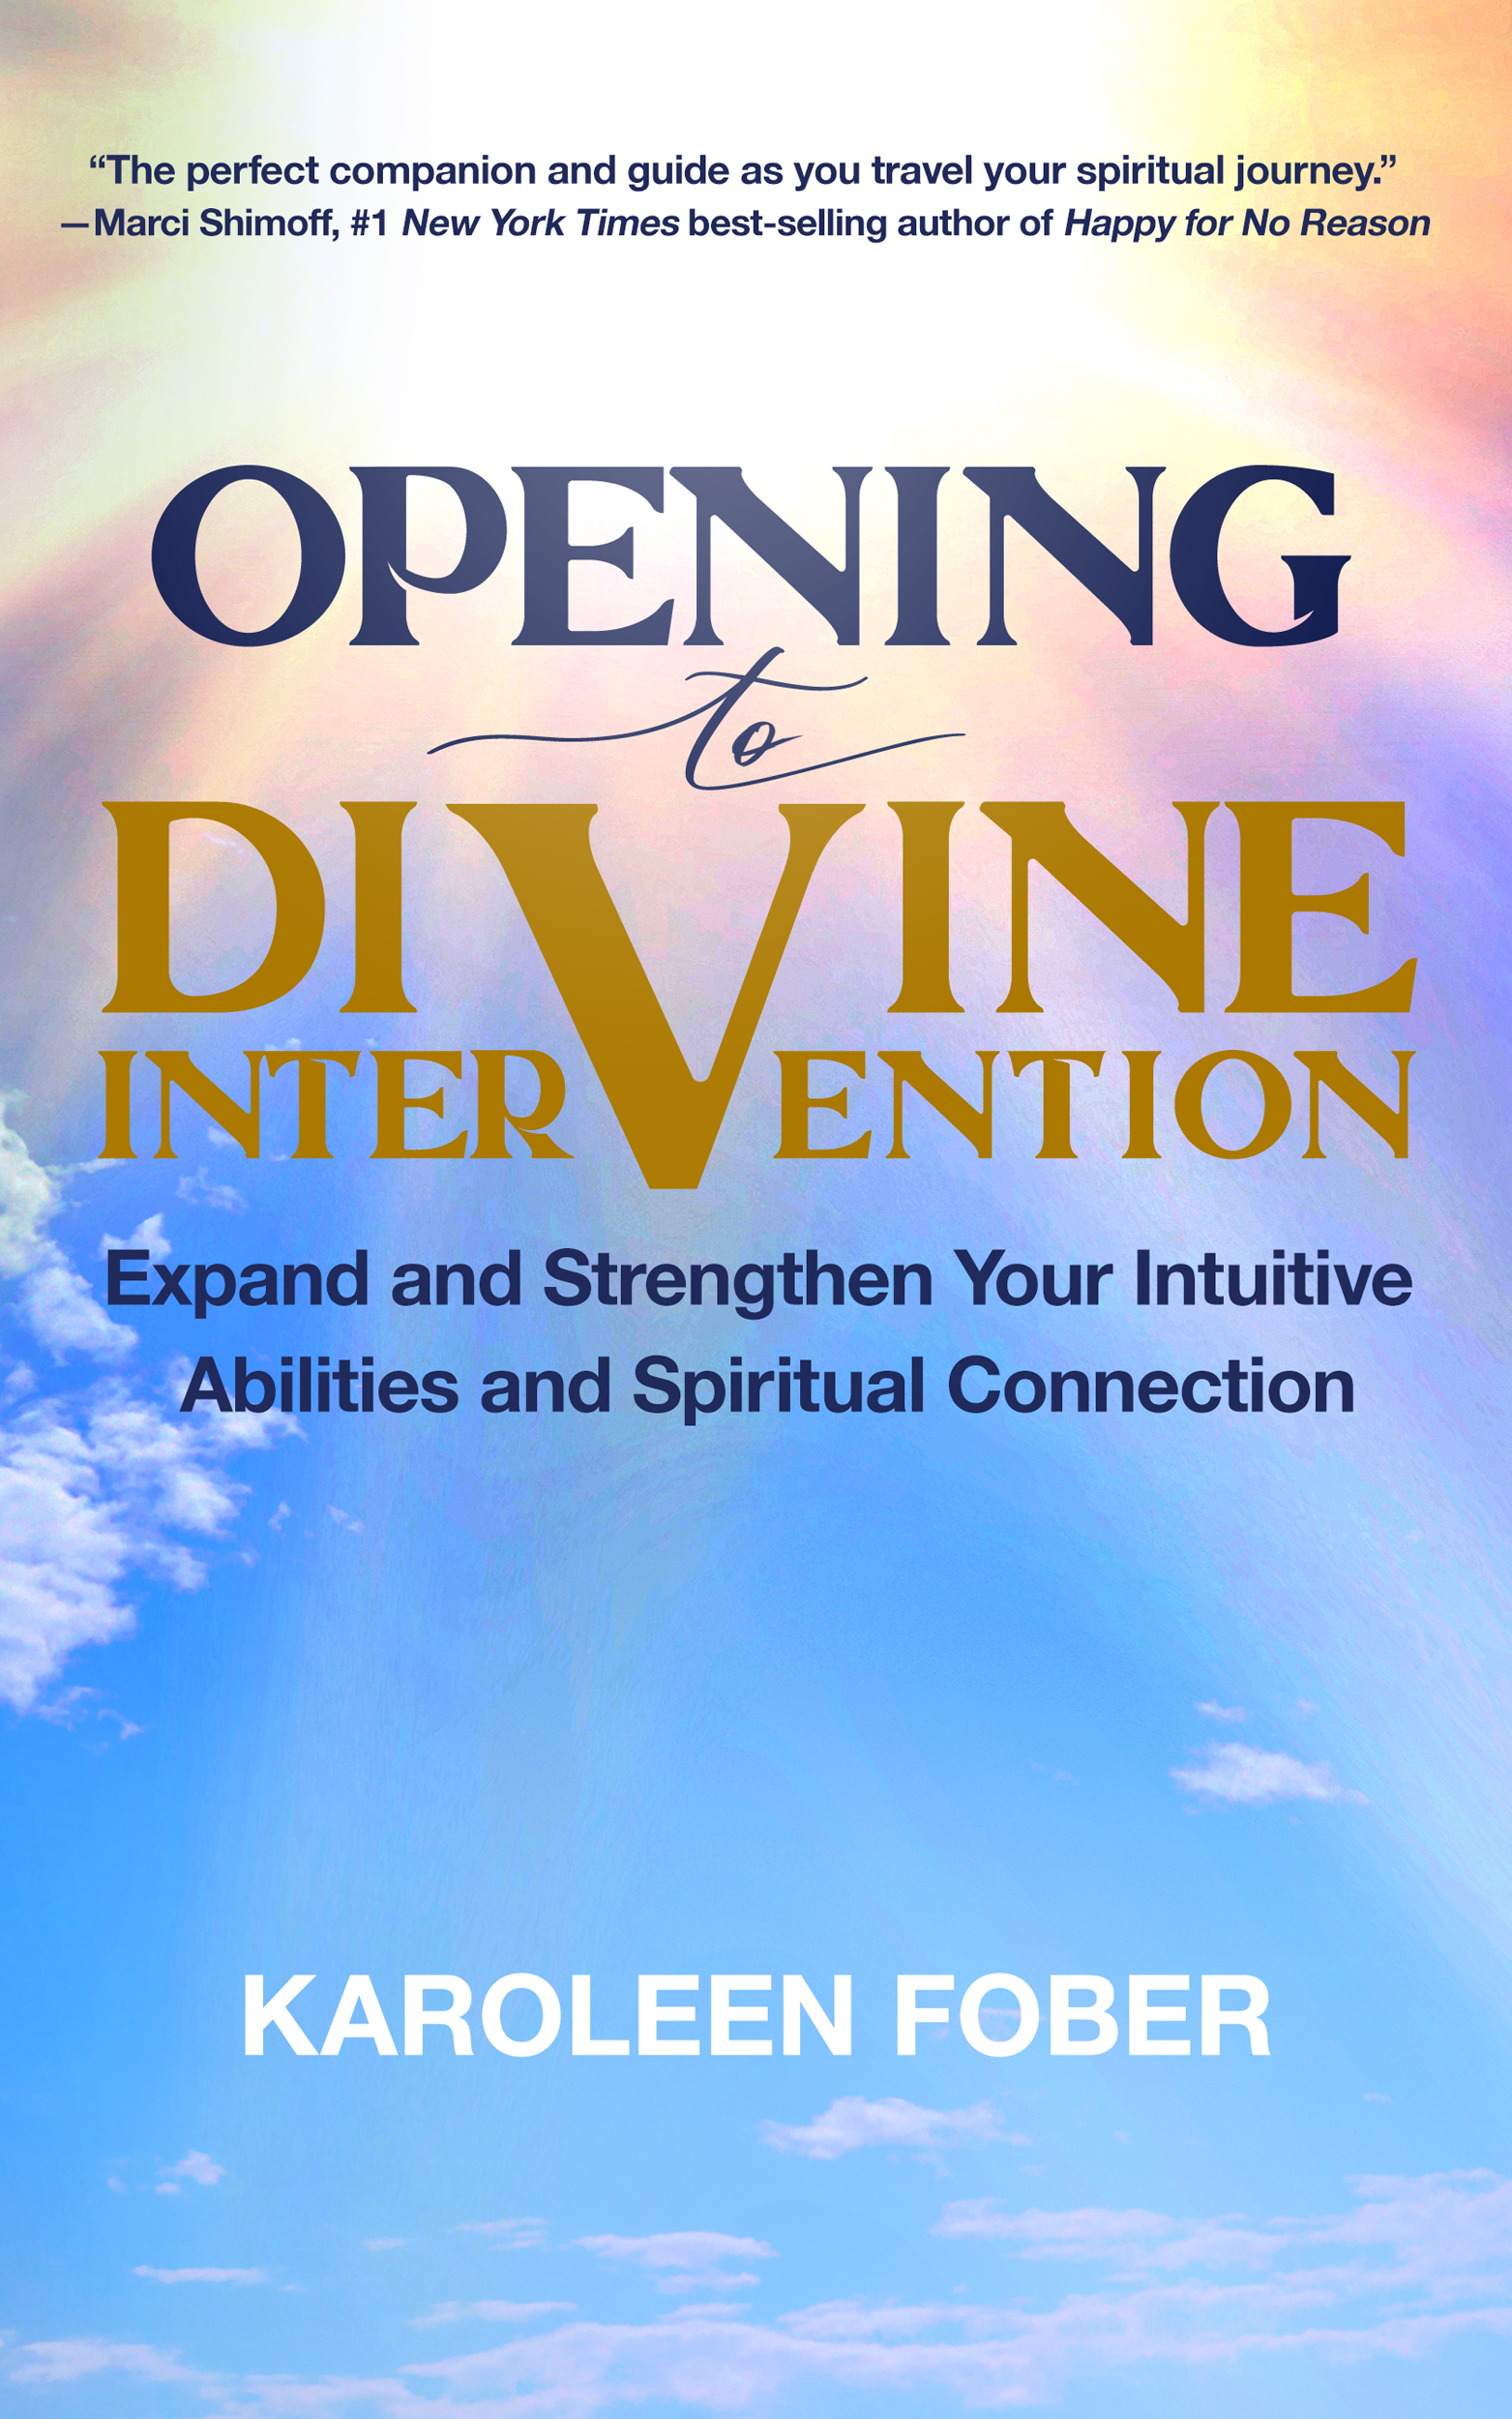 “Opening to Divine Intervention”